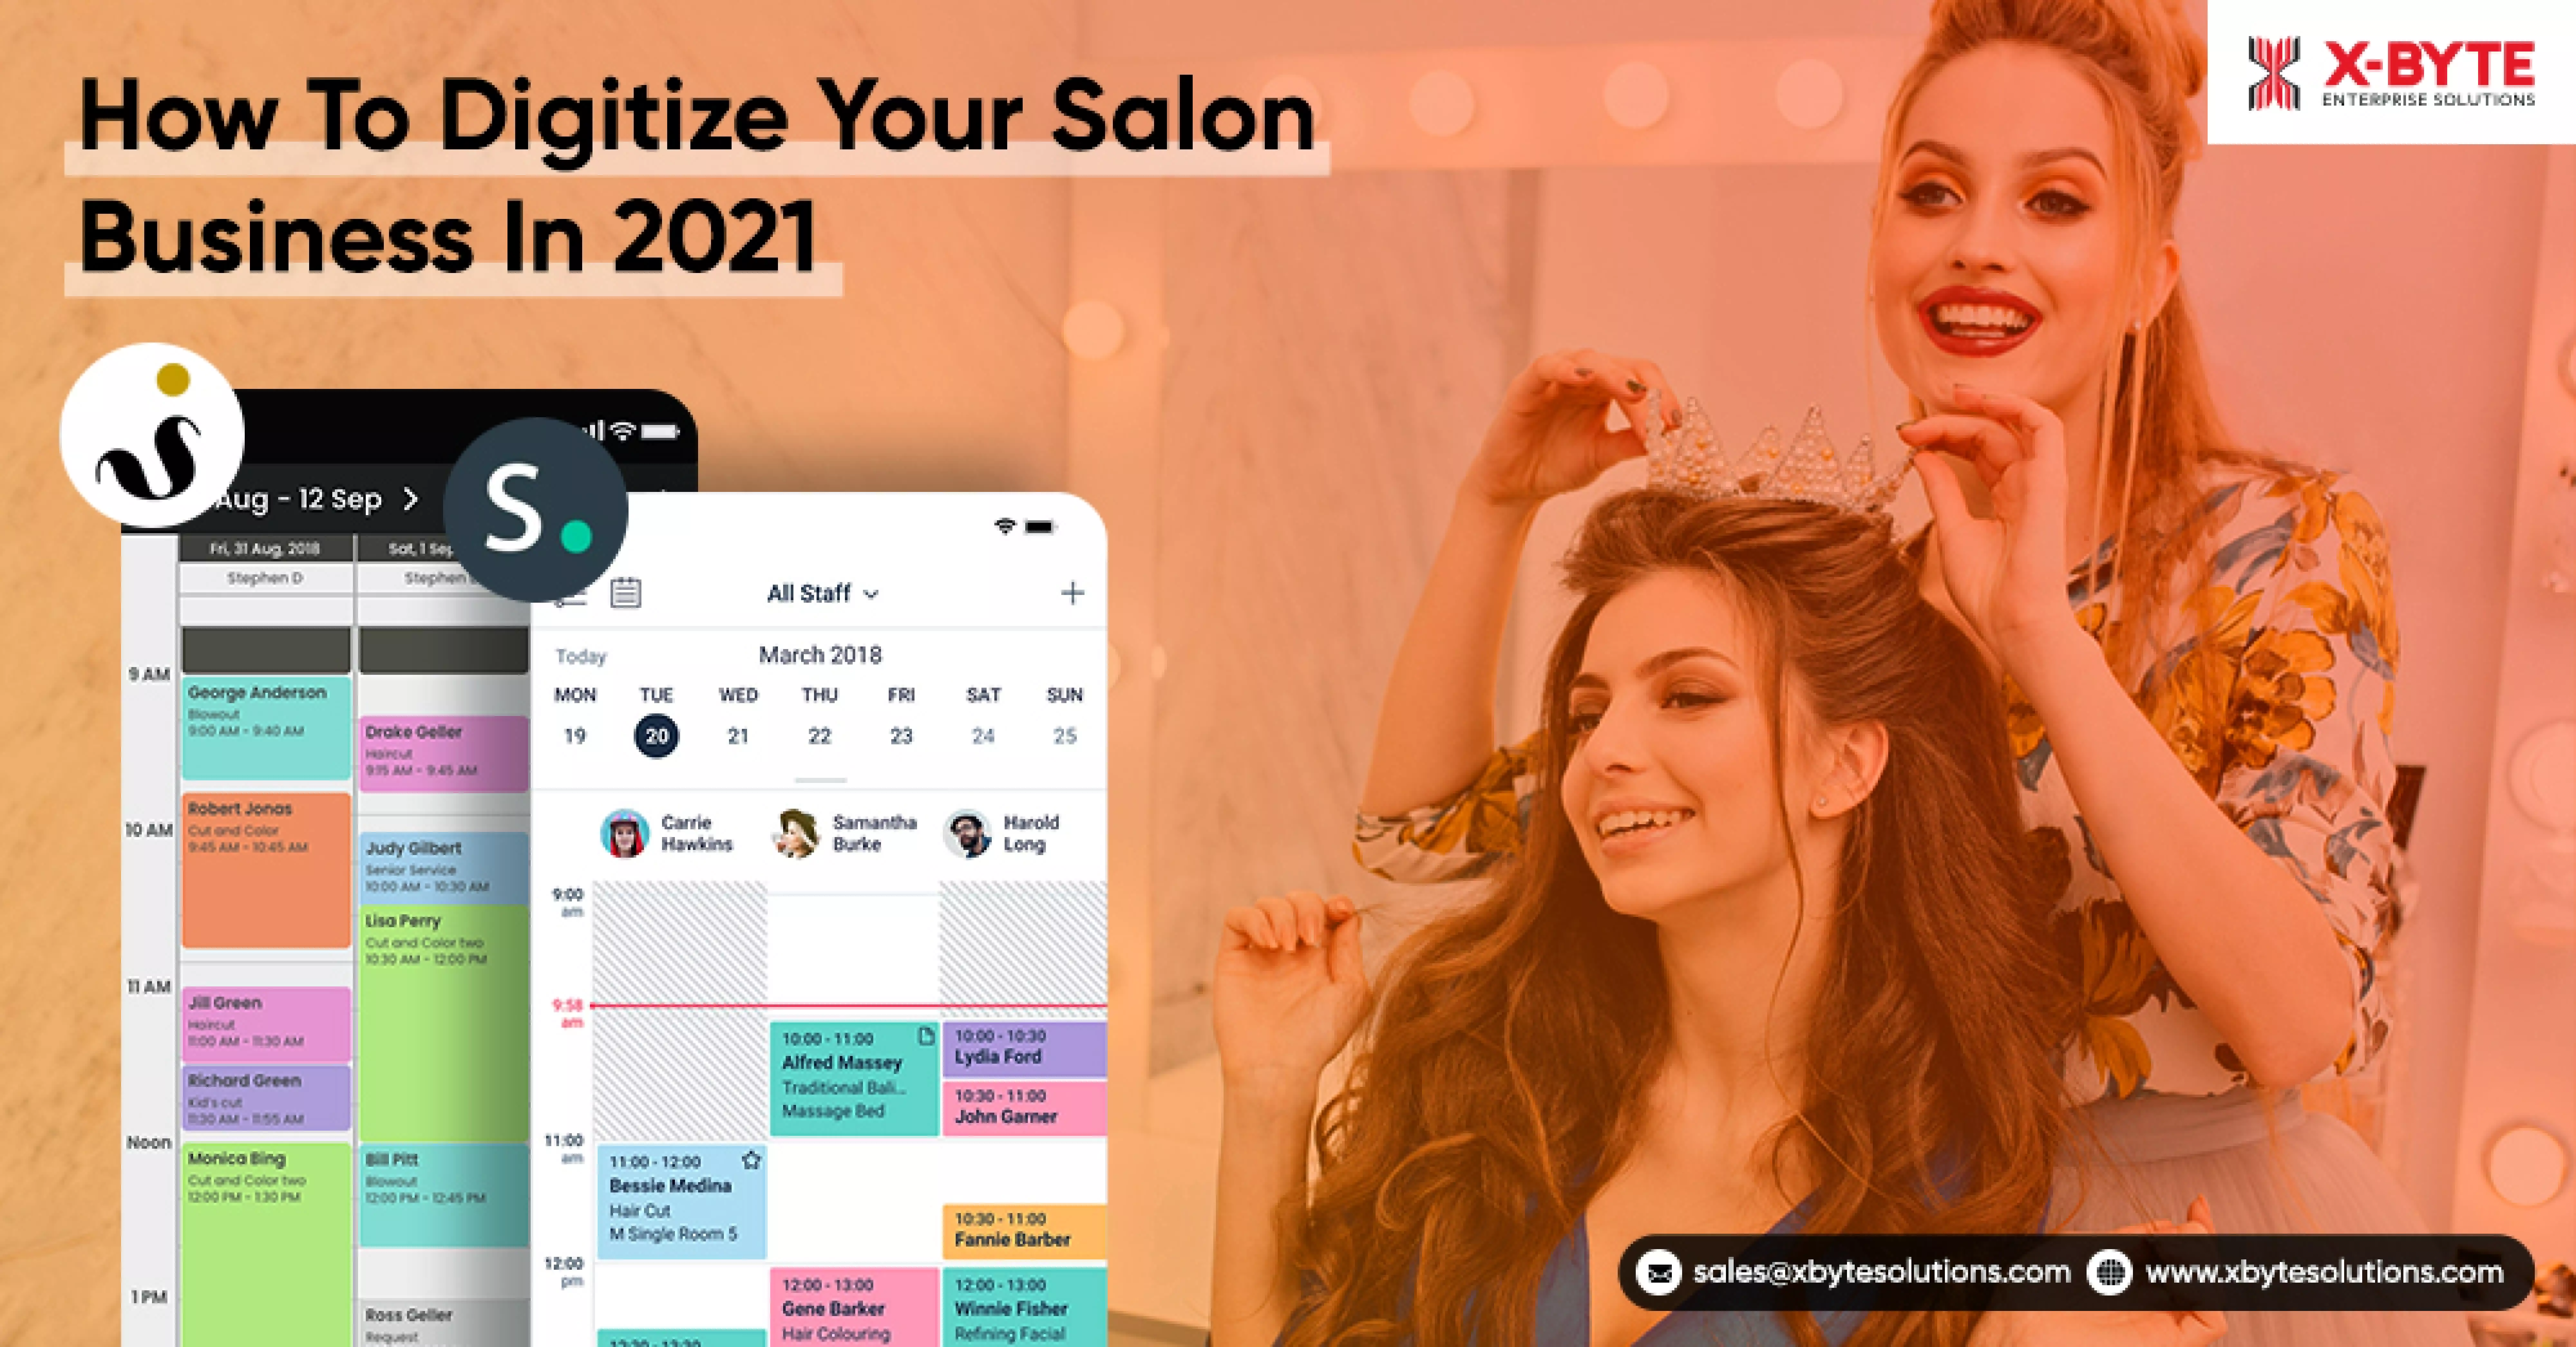 How to Digitize Your Salon Business In 2021